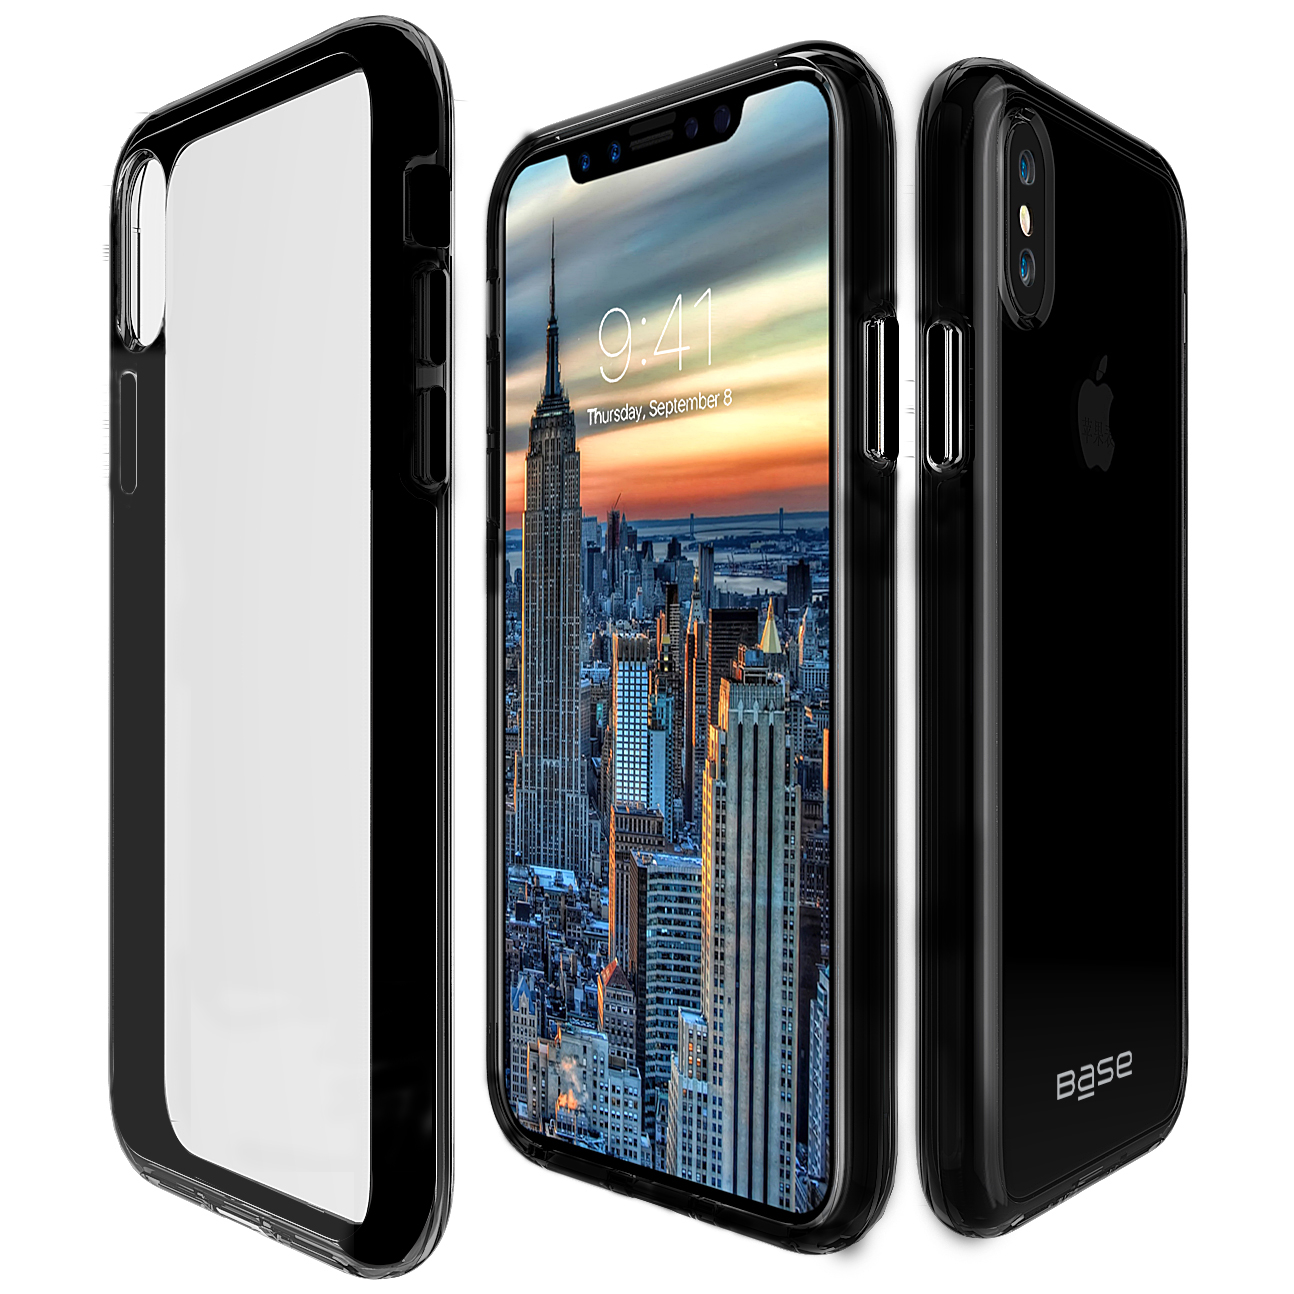 Clear thin case protector with black edges for iPhone X cell phones